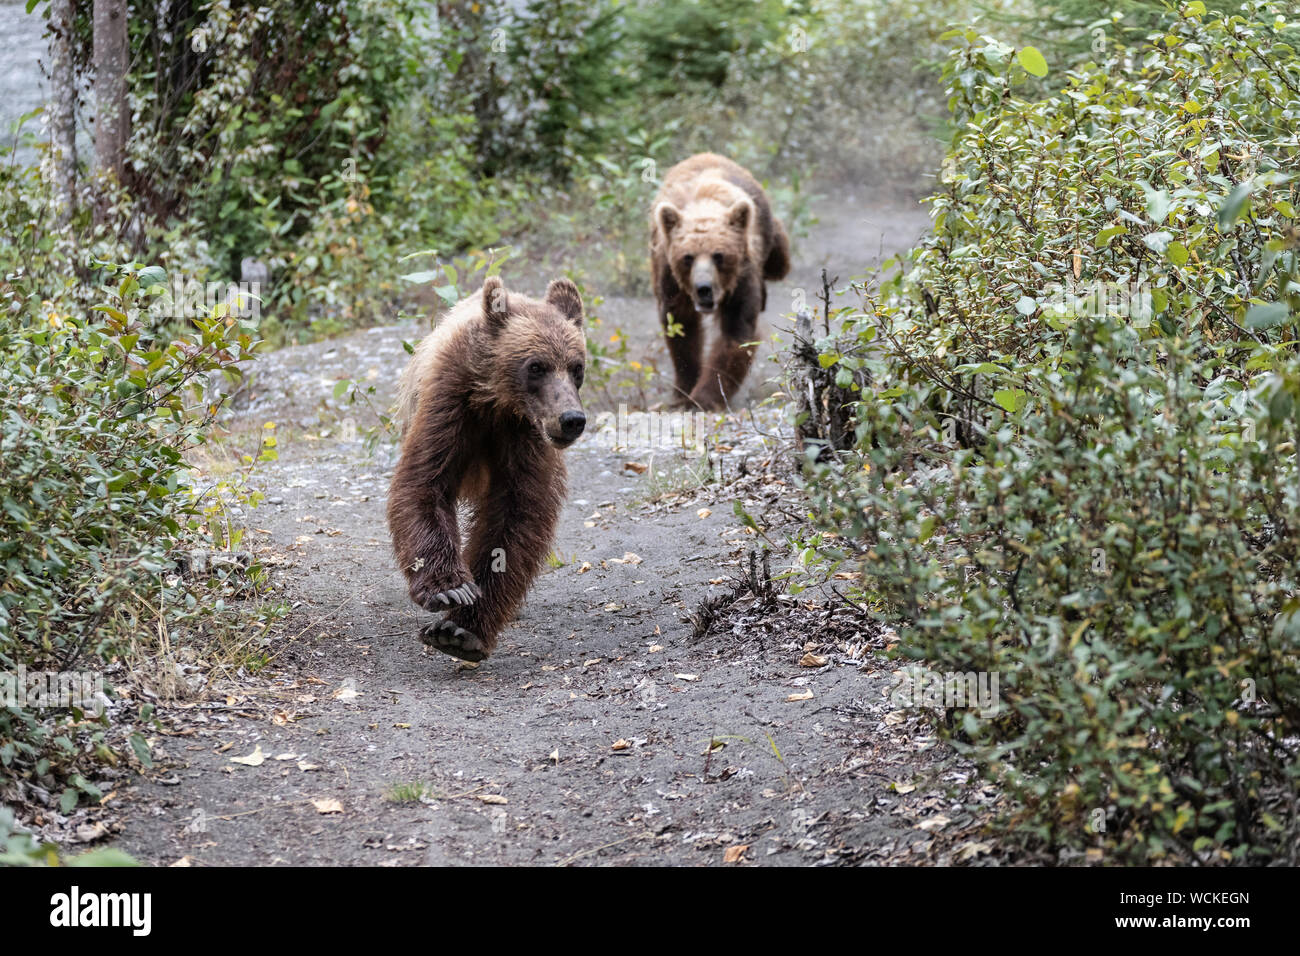 Female Grizzly Bear chasing off her young male cub, Ursus arctos horribilis, Brown Bear, North American, Canada, Stock Photo